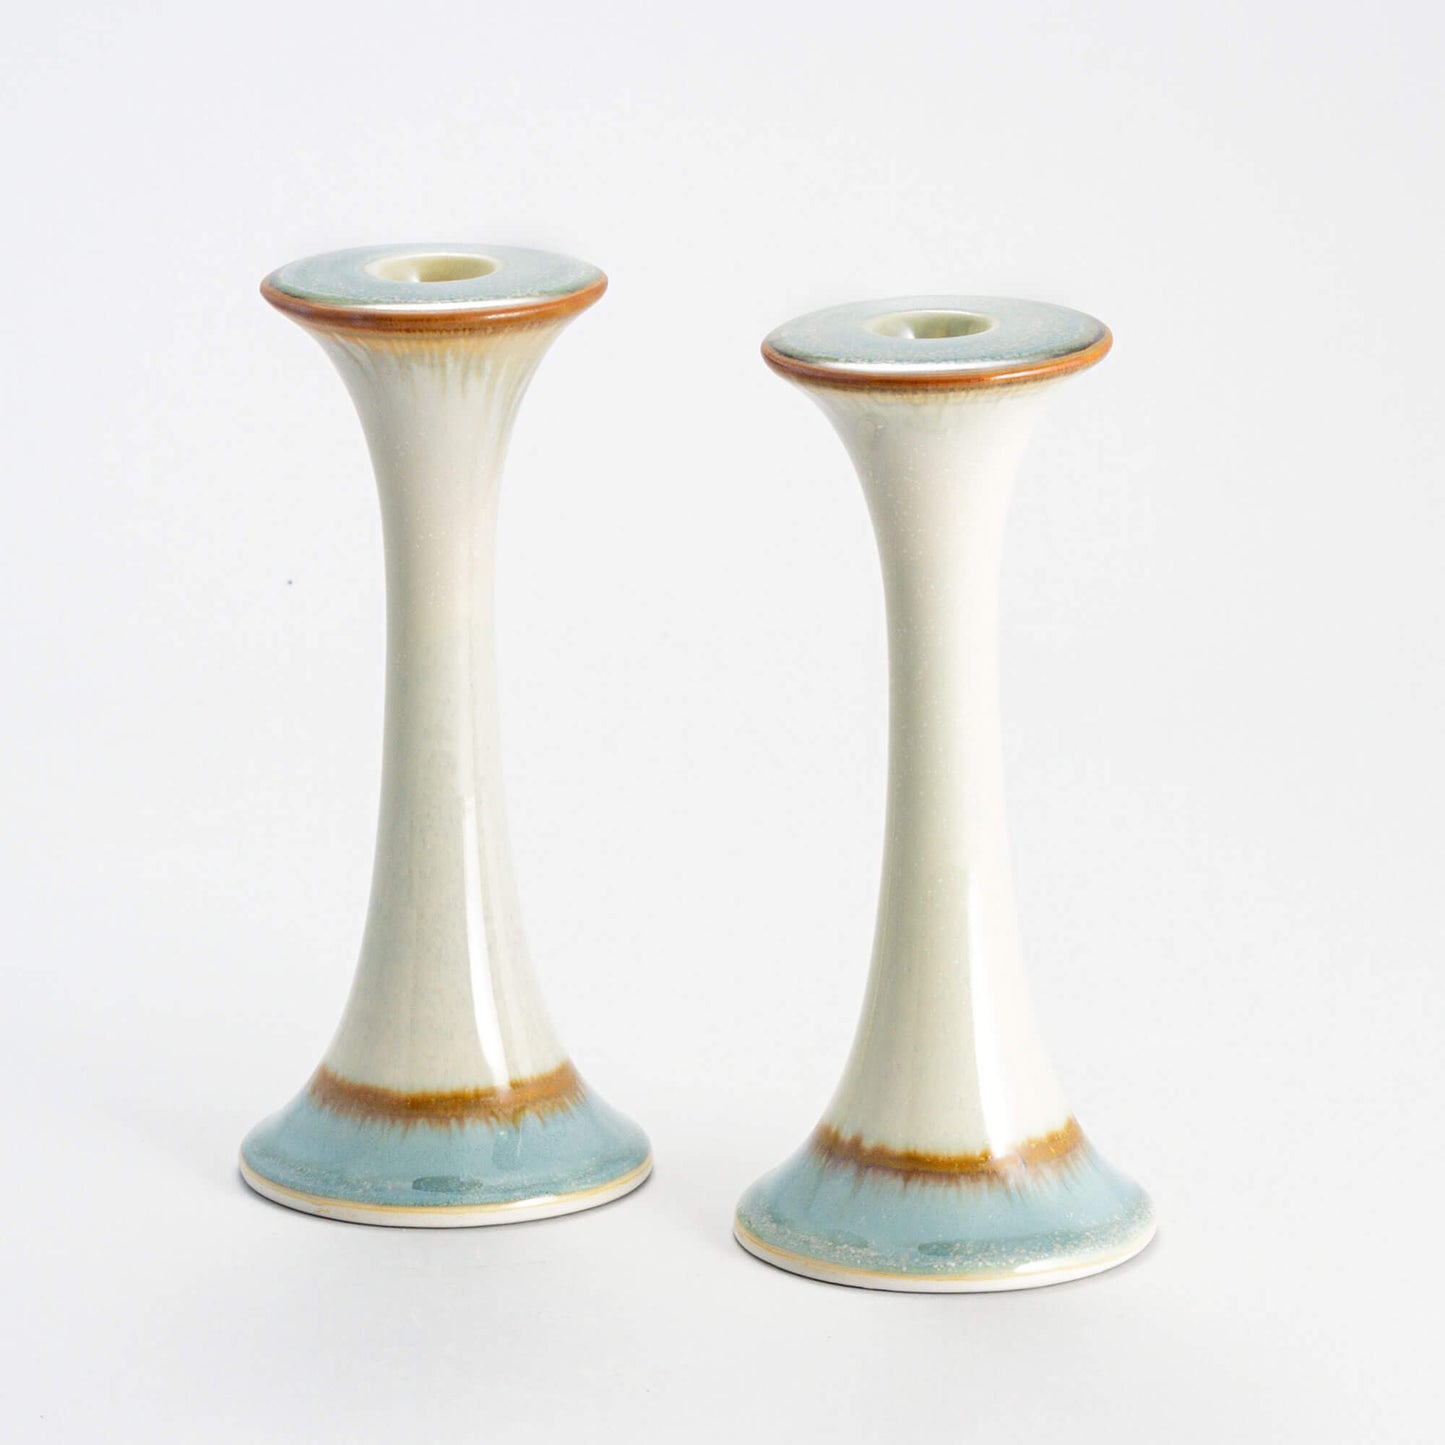 Handmade Pottery Candlestick Holders in Ivory & Blue pattern made by Georgetown Pottery in Maine